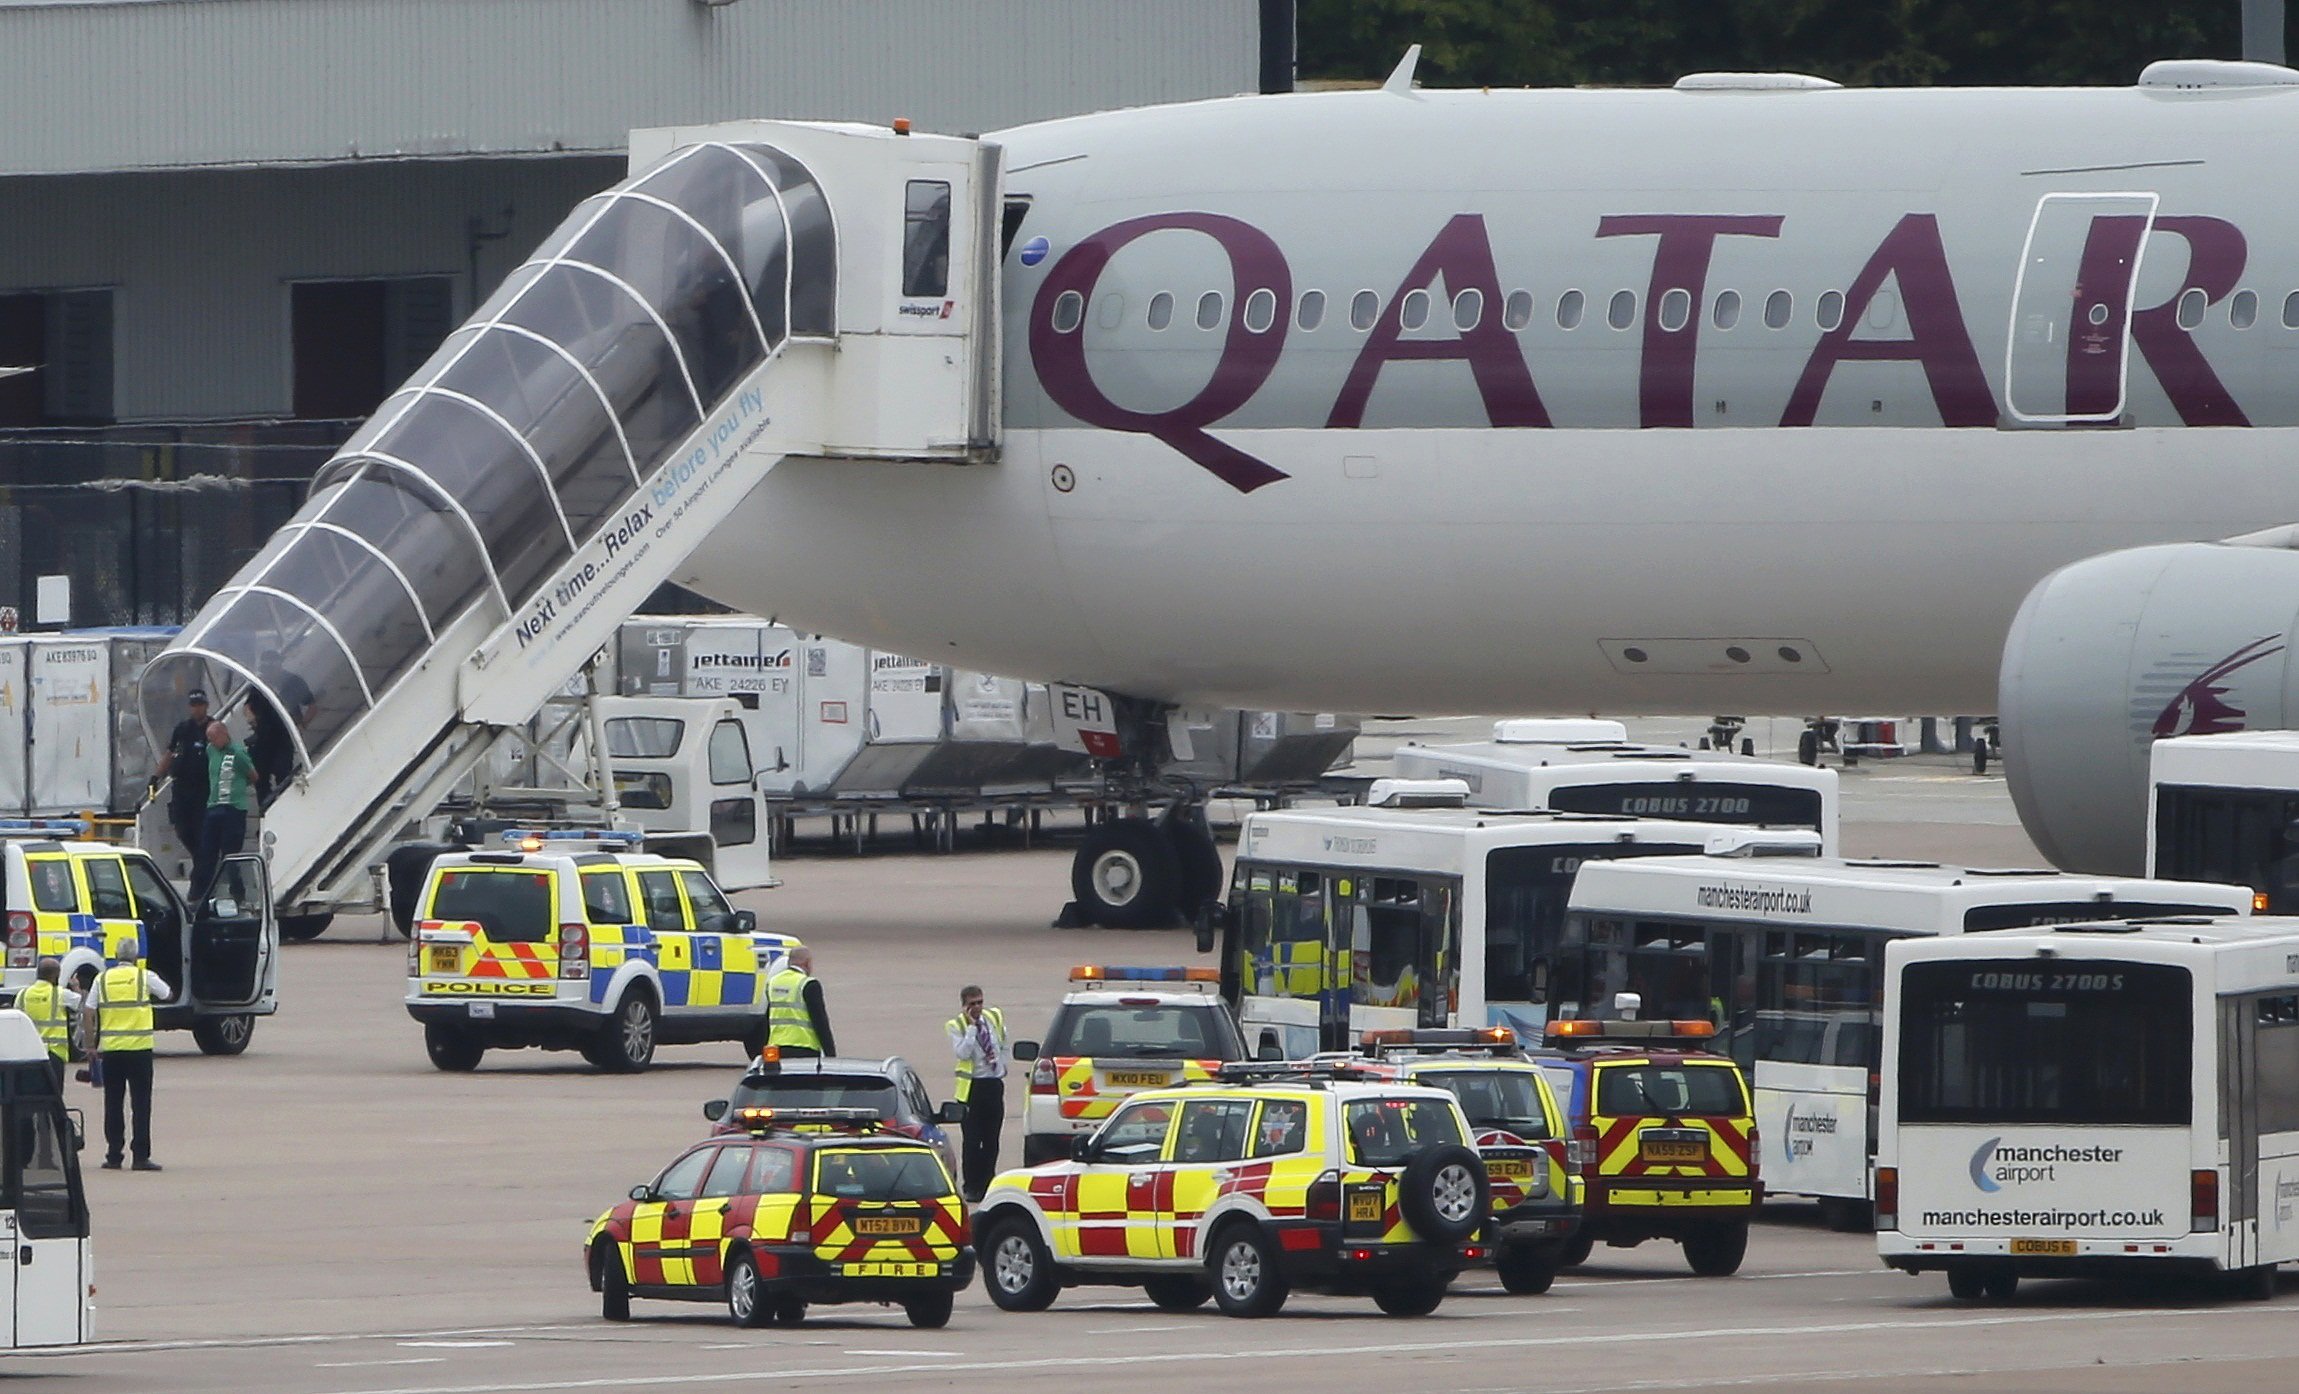 A man is escorted off a Qatar Airways aircraft by police at Manchester airport in Manchester, England on August 5, 2014. A British fighter jet escorted a passenger plane into Manchester airport on Tuesday after the pilot reported that a suspect device was possibly on board.